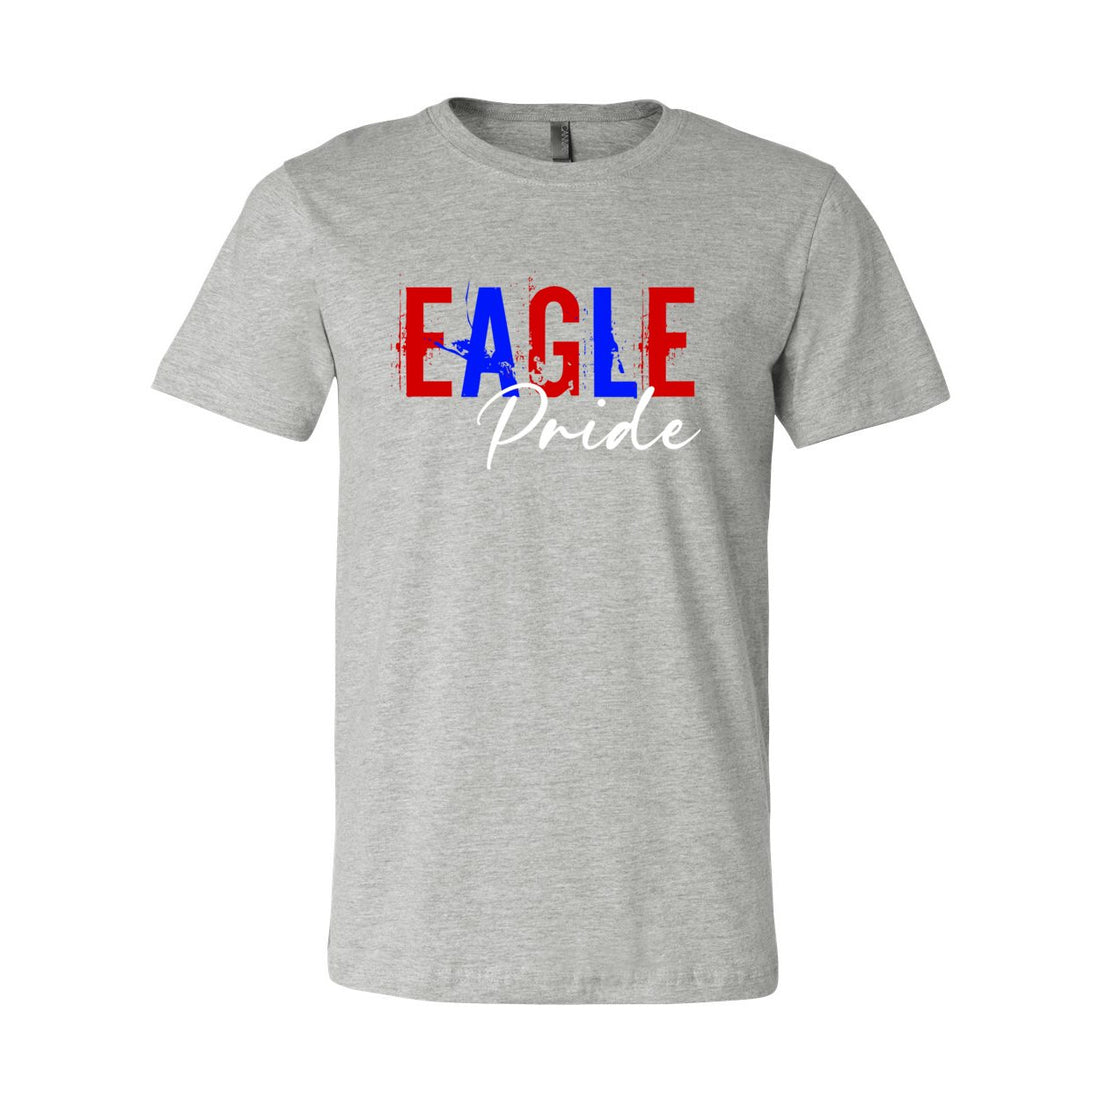 Eagle Pride Short Sleeve Jersey Tee - T-Shirts - Positively Sassy - Eagle Pride Short Sleeve Jersey Tee